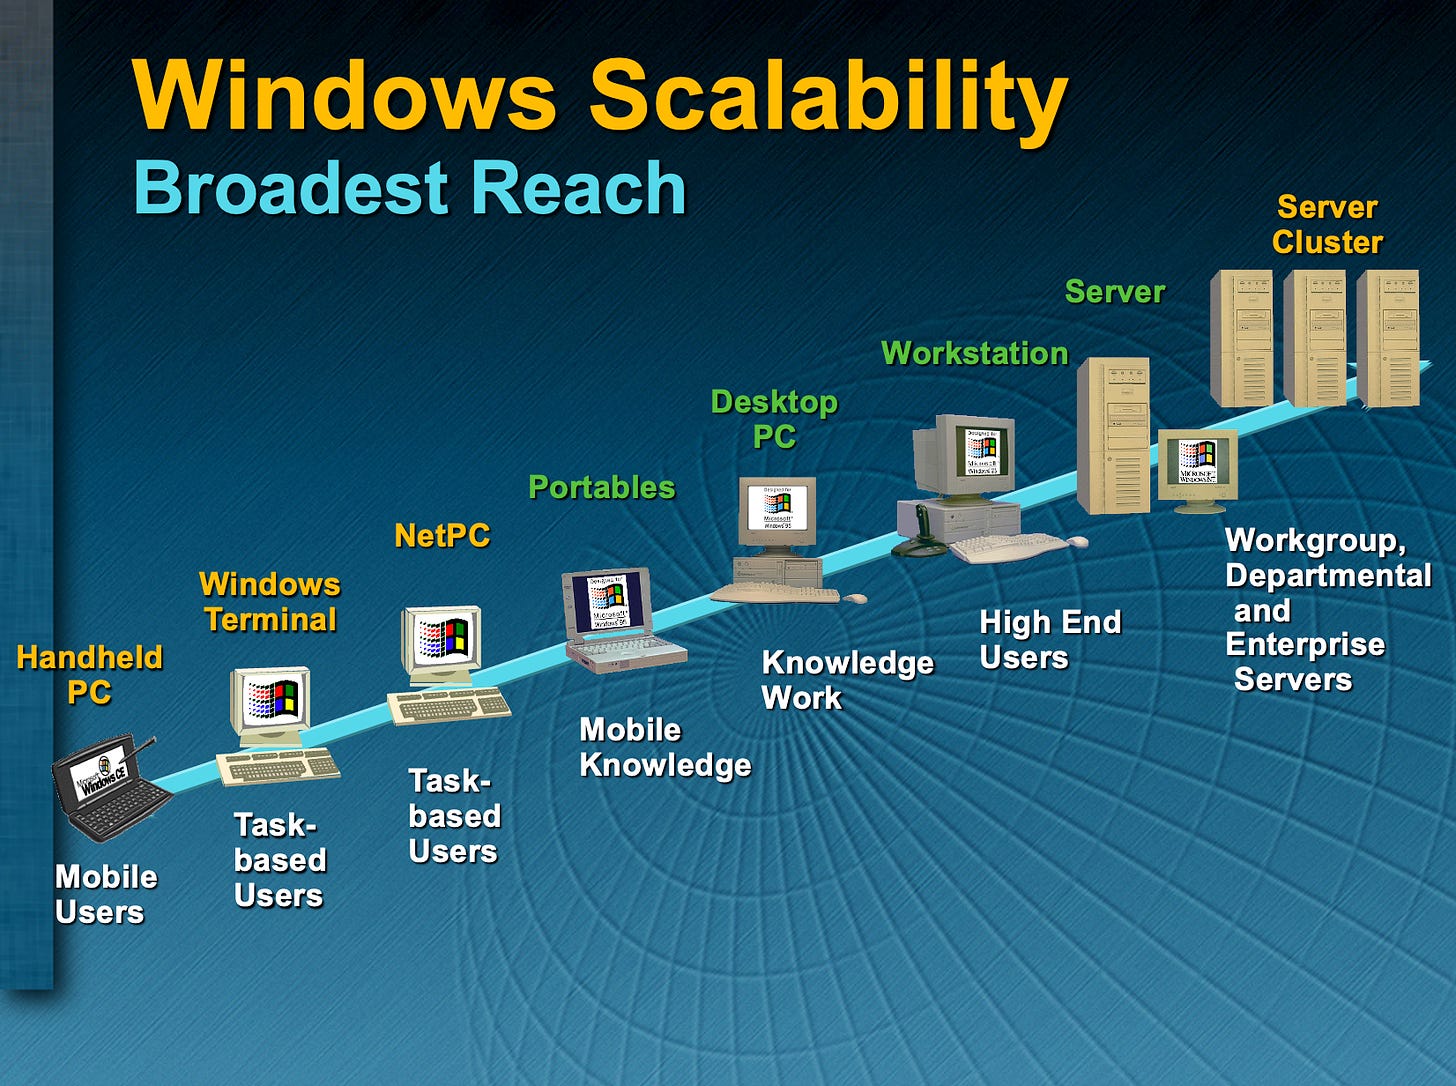 Windows Scalability - a diagram showing windows going from handheld PCs all the way to servers. It shows examples in cartoon format of every type of Windows computer.